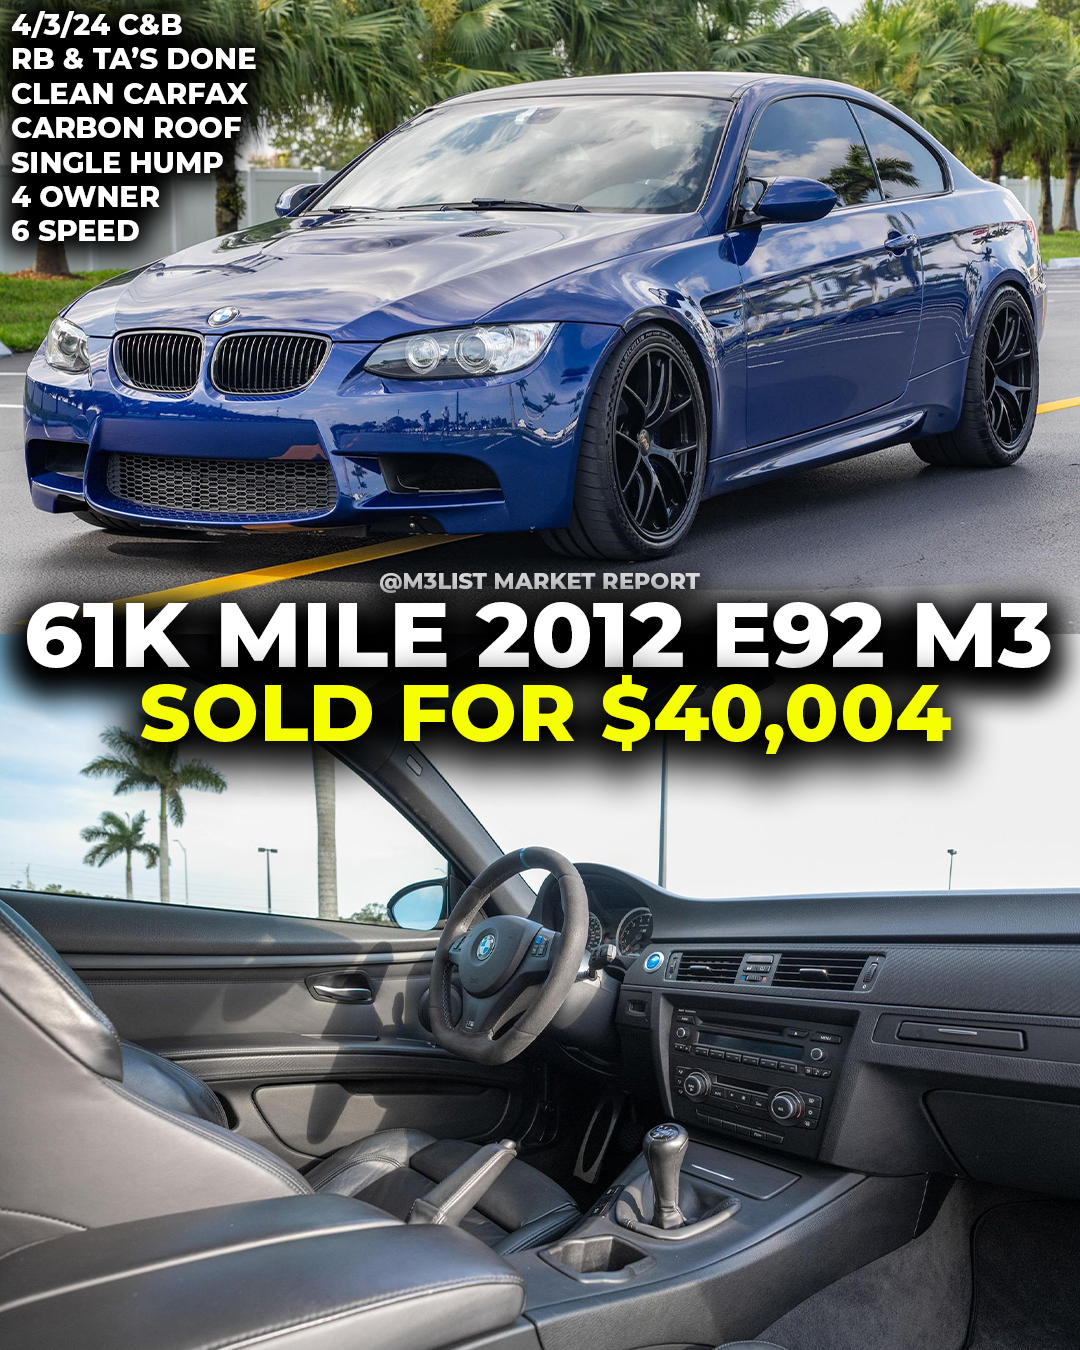 61k mile 2012 E92 M3 6 speed single hump sells for $40k on Cars & Bids